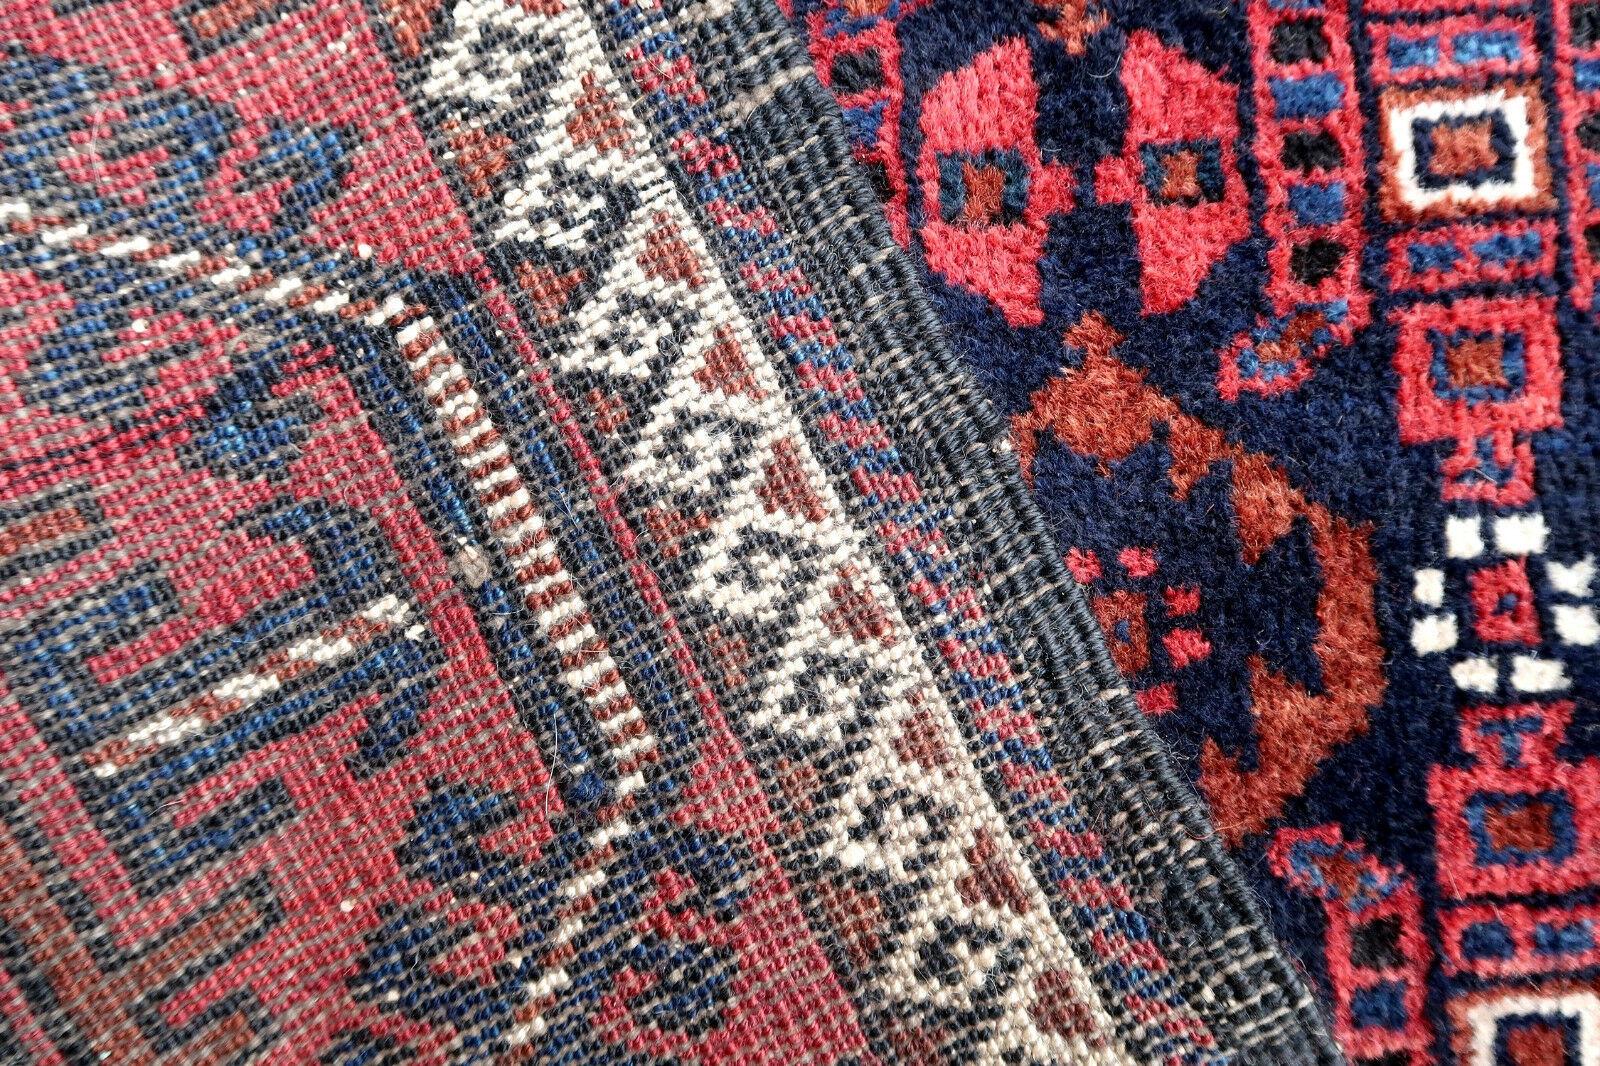 Handmade antique Baluch rug from Central Asia in original good condition. The rug is from the beginning of 20th century.

?-condition: original good,

-circa: 1940s,

-size: 3.2' x 5.9' (97cm x 180cm),

-material: wool,

-country of